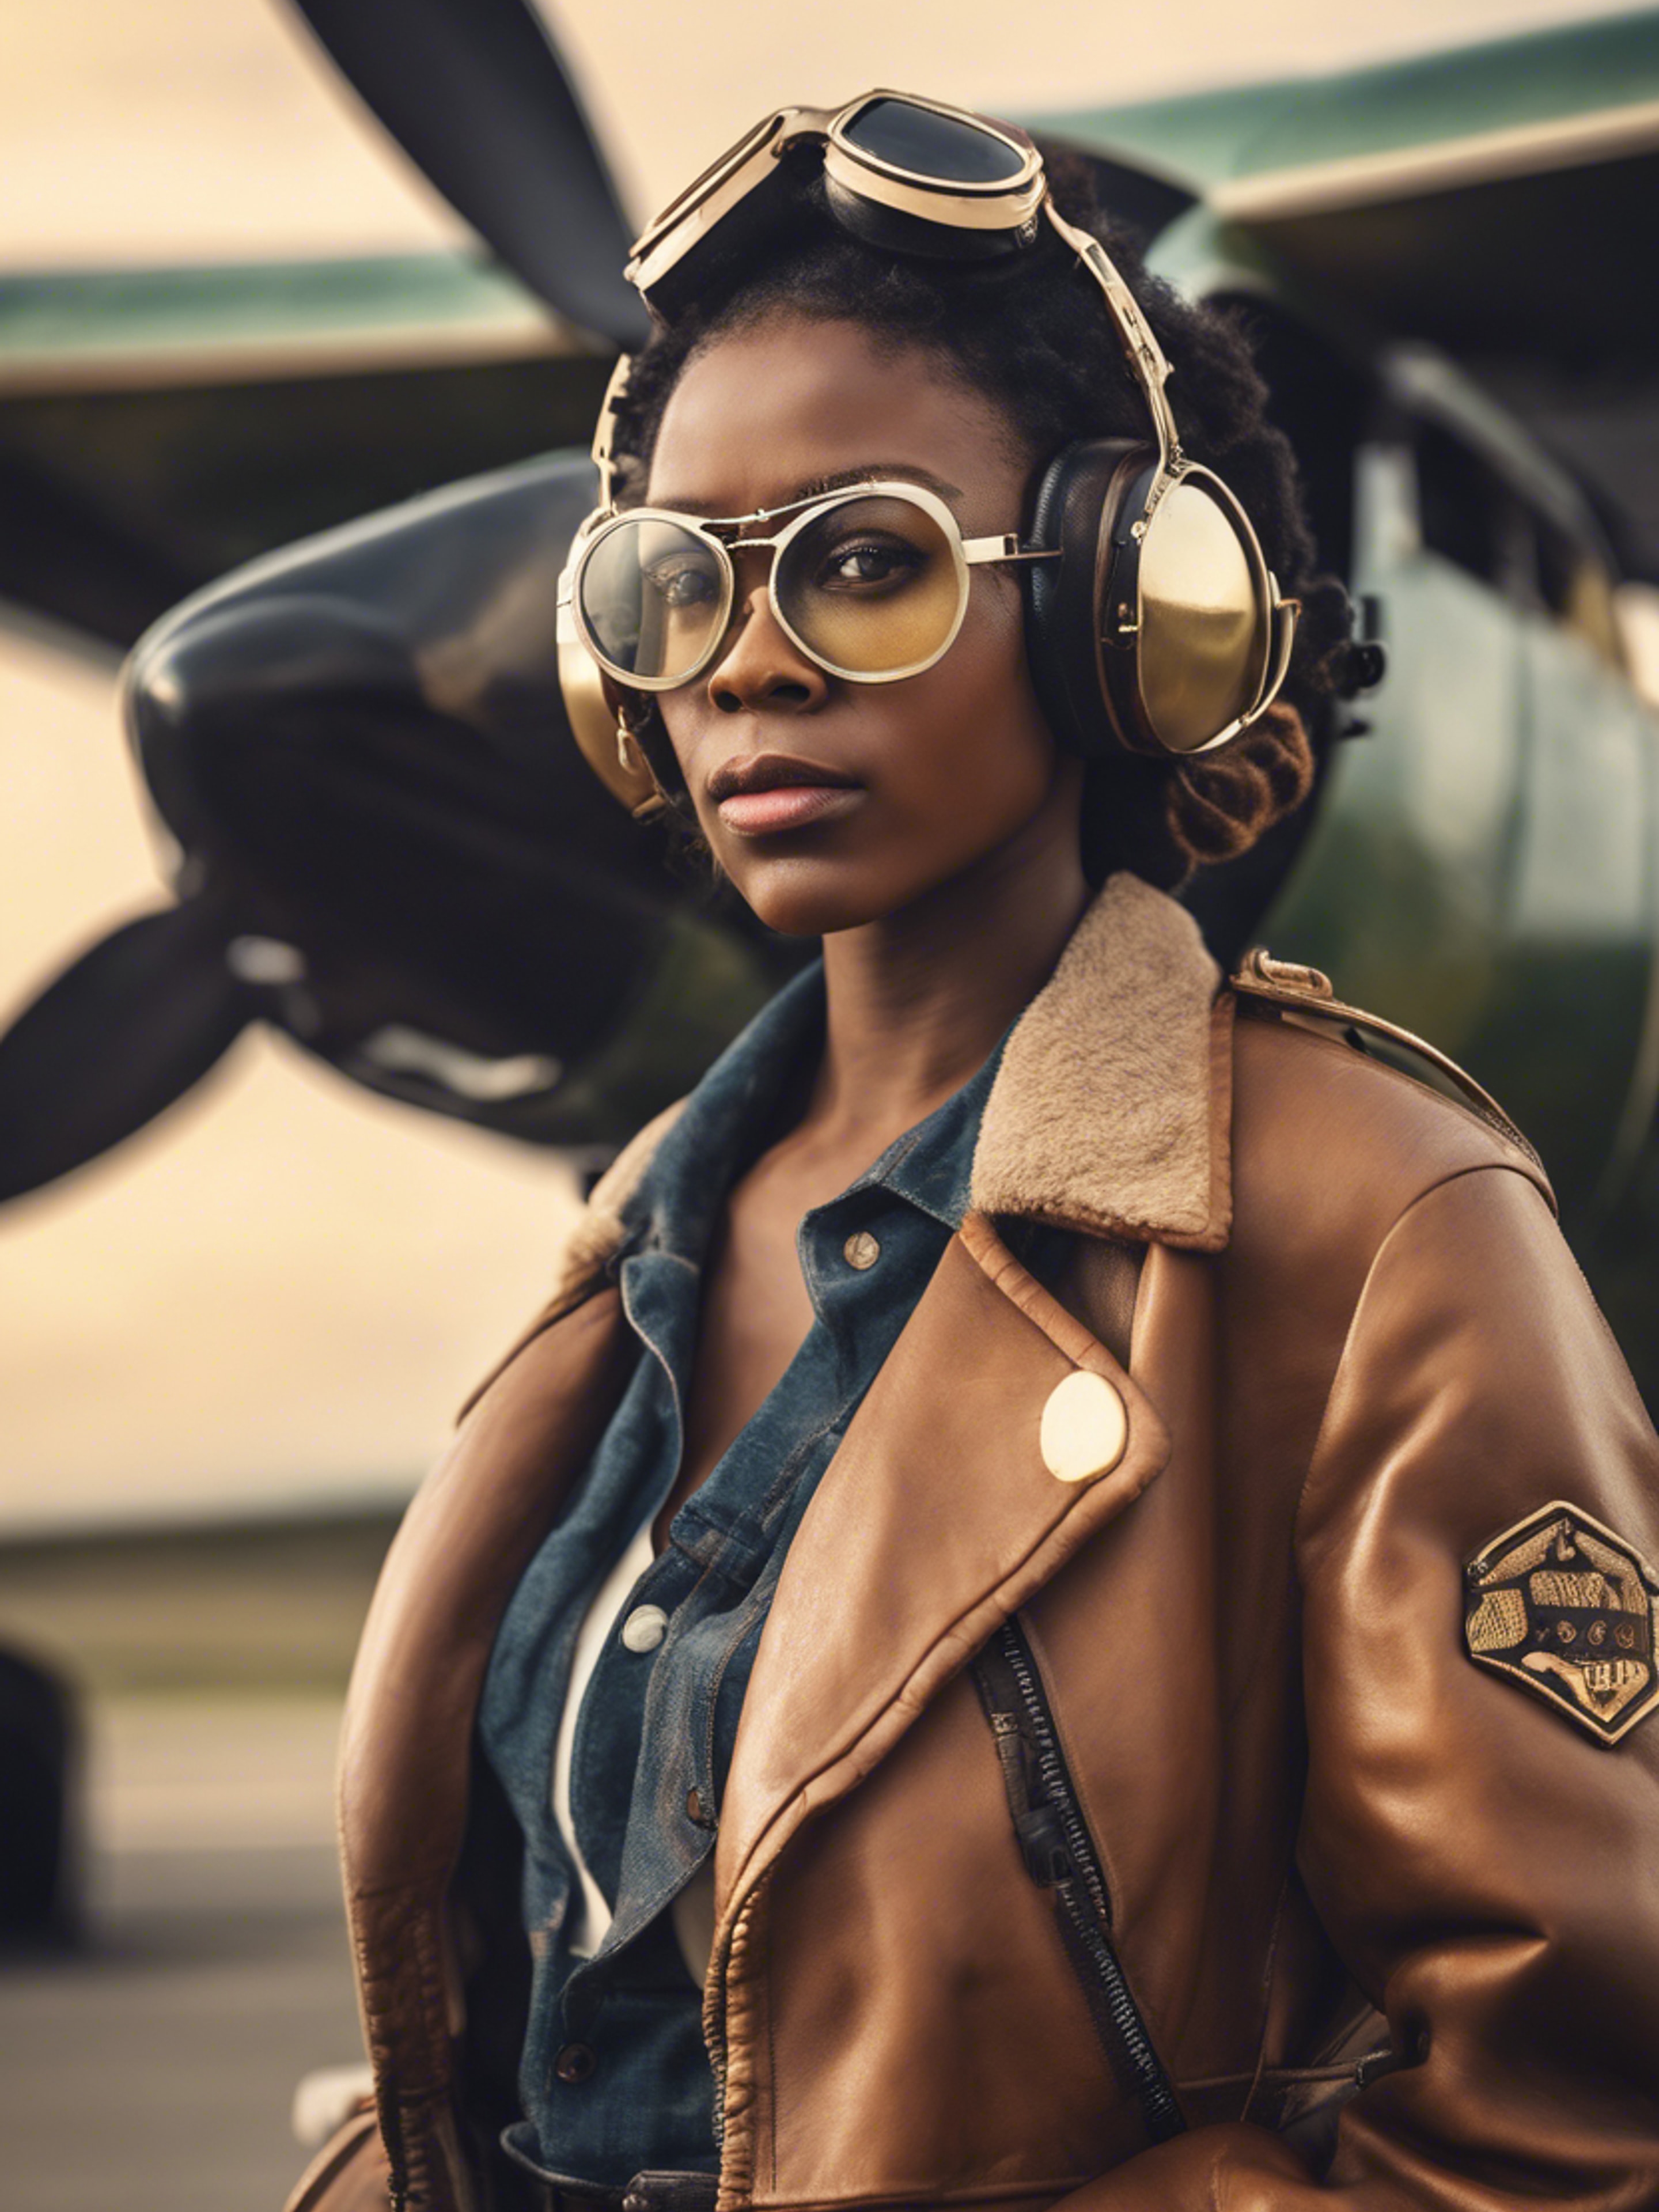 A black girl in an aviator jacket and goggles flying a retro propeller plane. 墙纸[82958076c6f747e0ac9d]